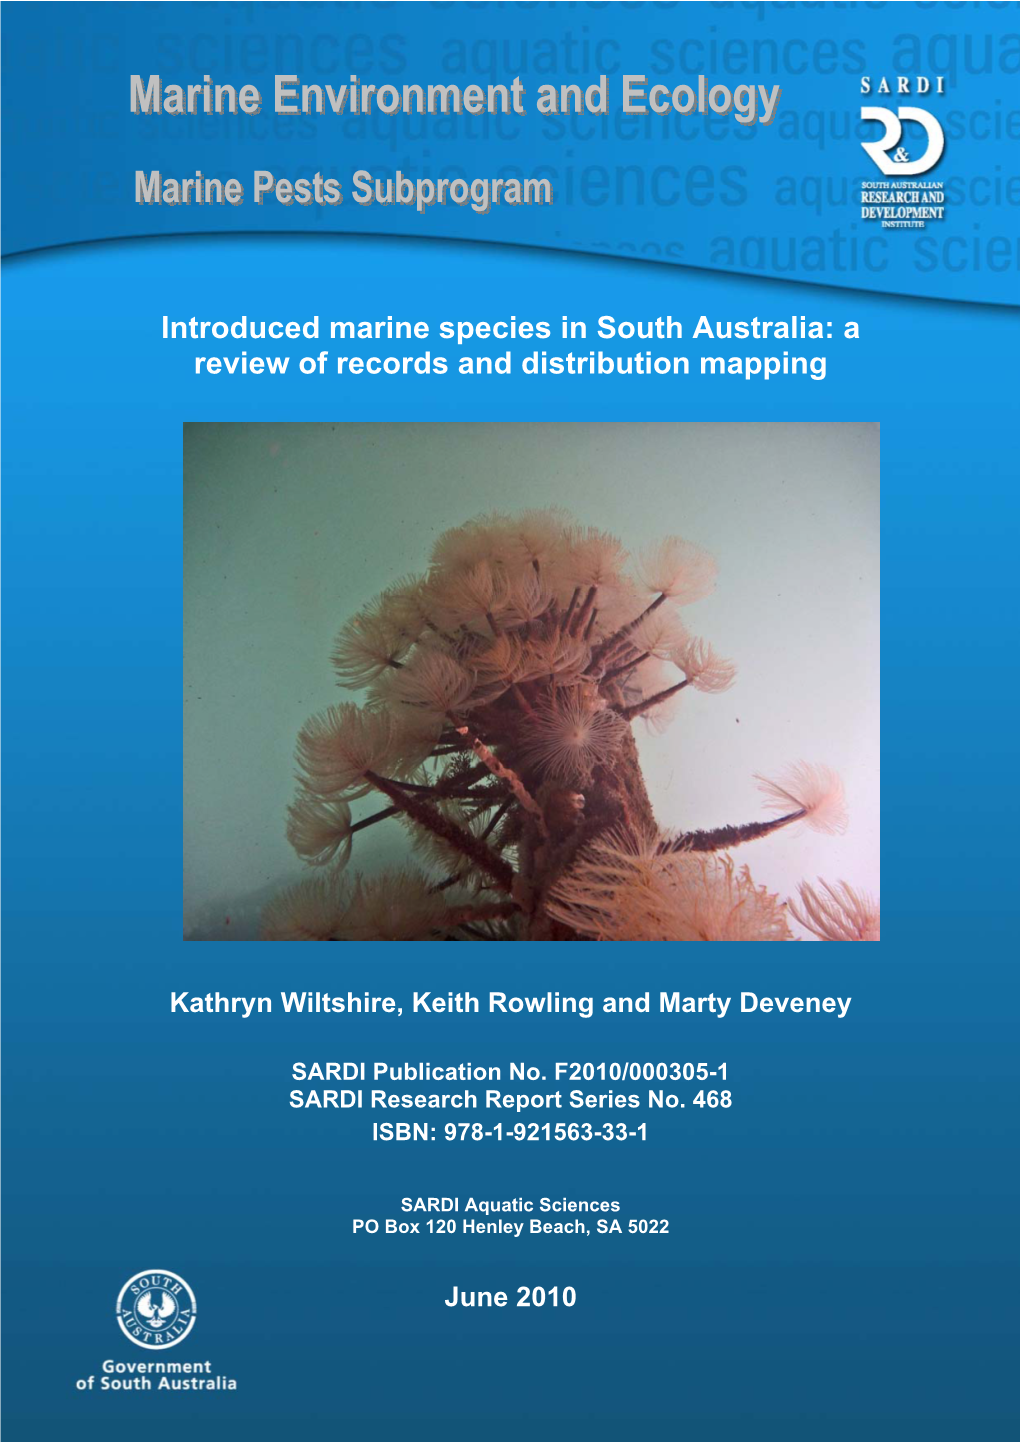 Introduced Marine Species in South Australia: a Review of Records and Distribution Mapping